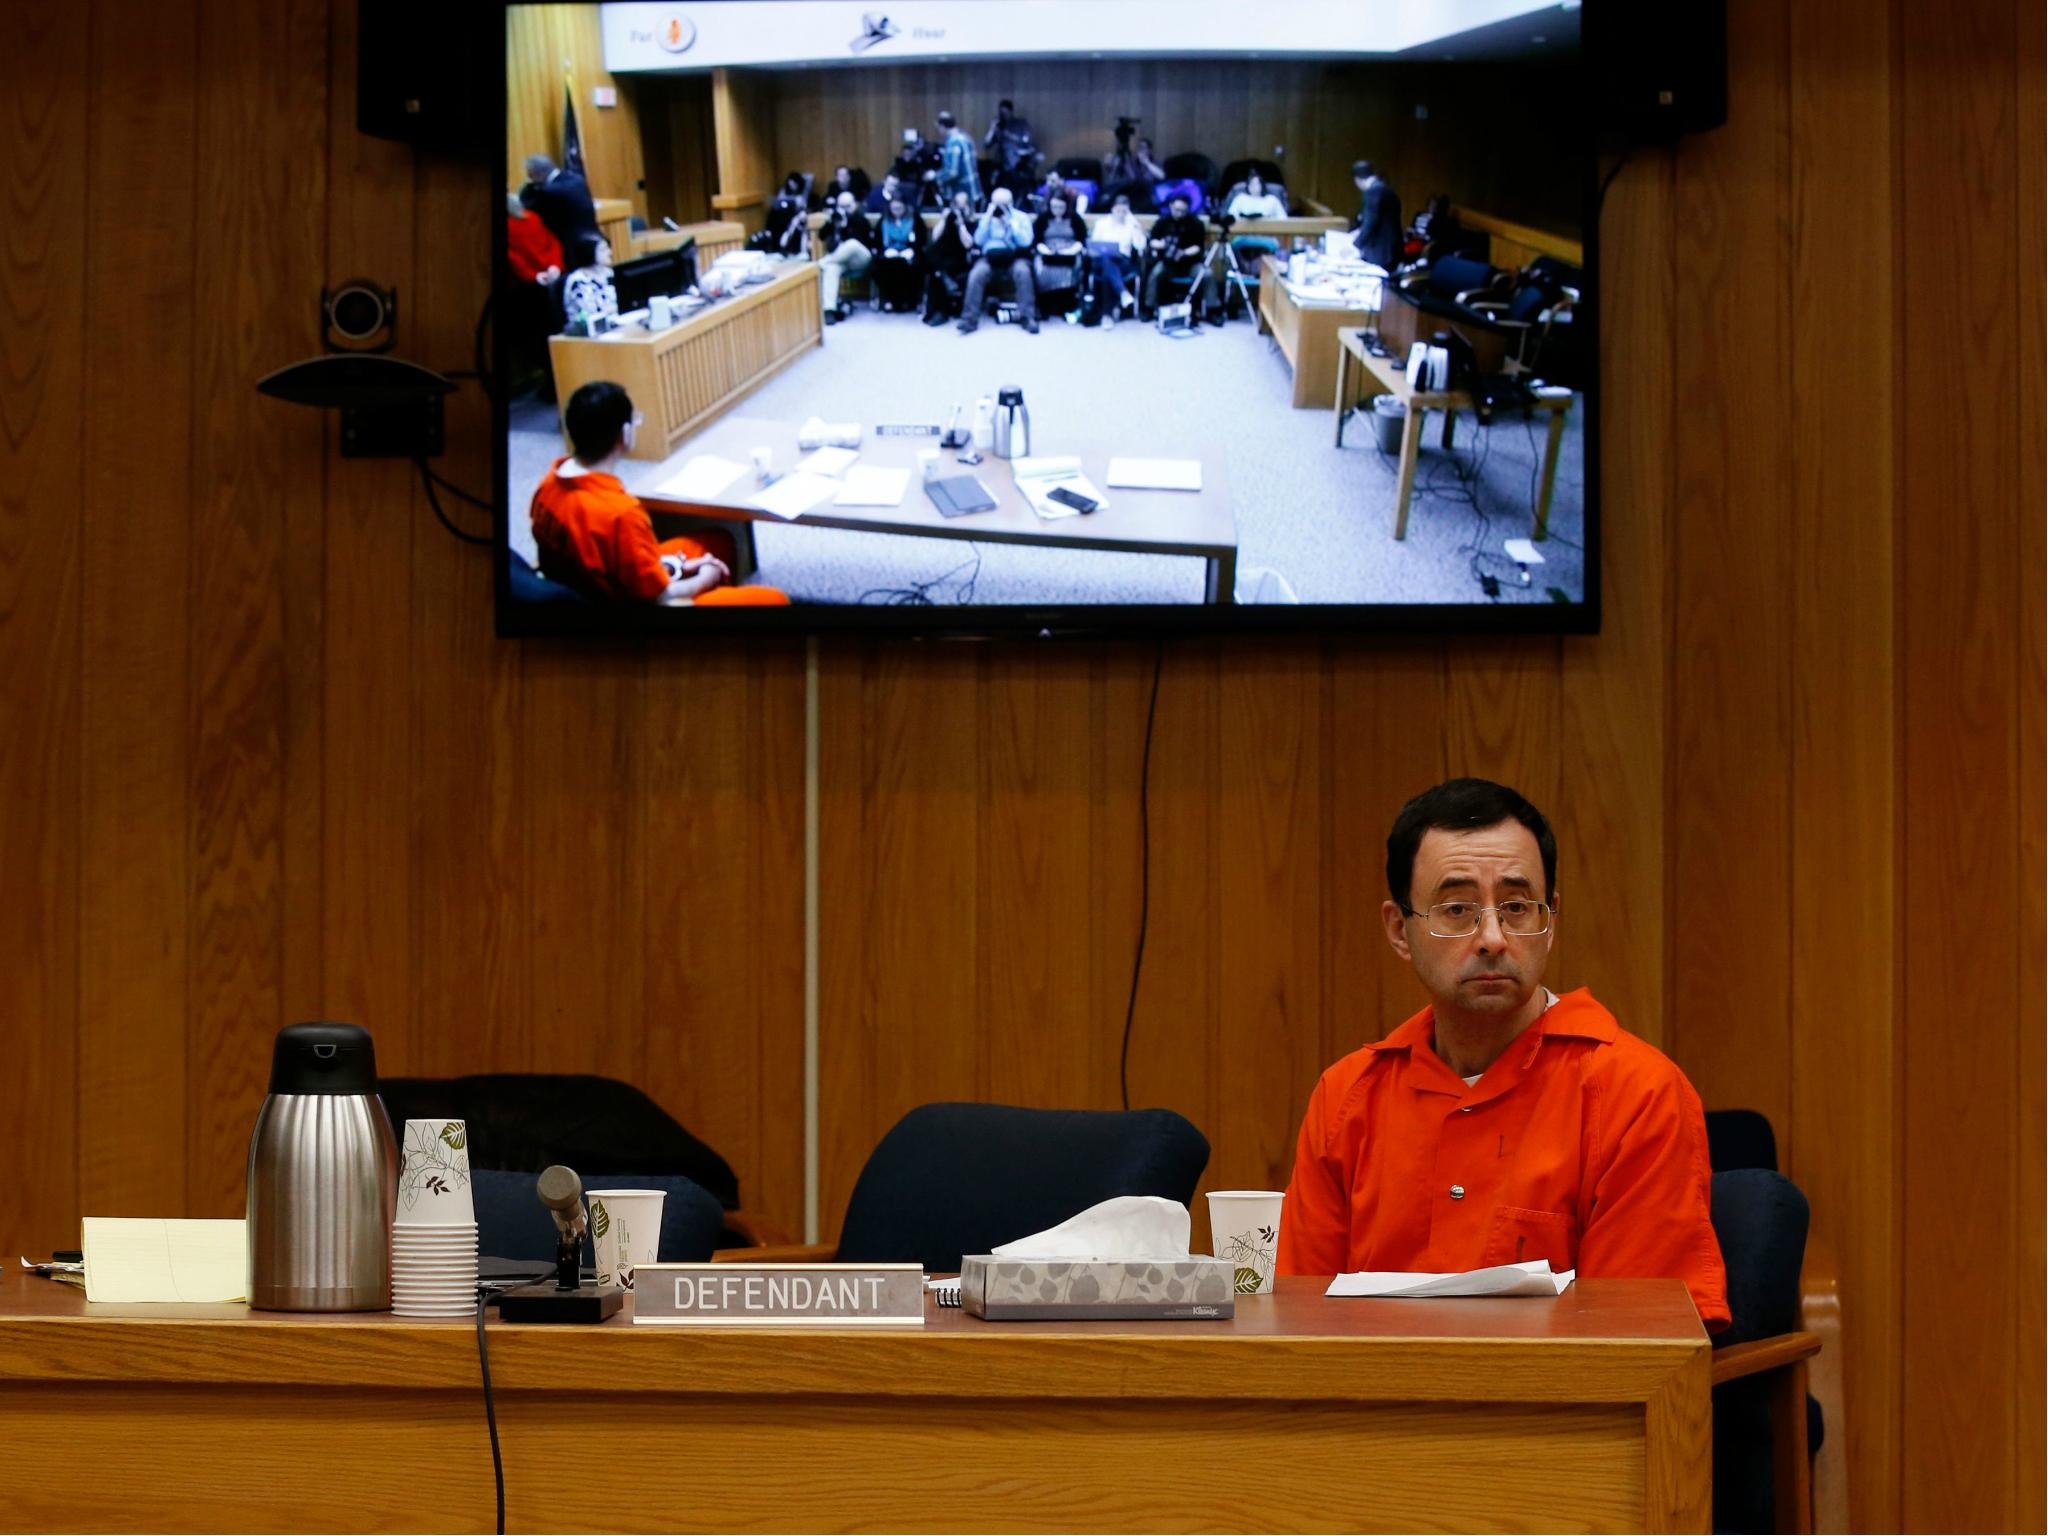 Former Michigan State University and USA Gymnastics doctor Larry Nassar listens during the sentencing phase in Eaton, County Circuit Court on 31 January 2018